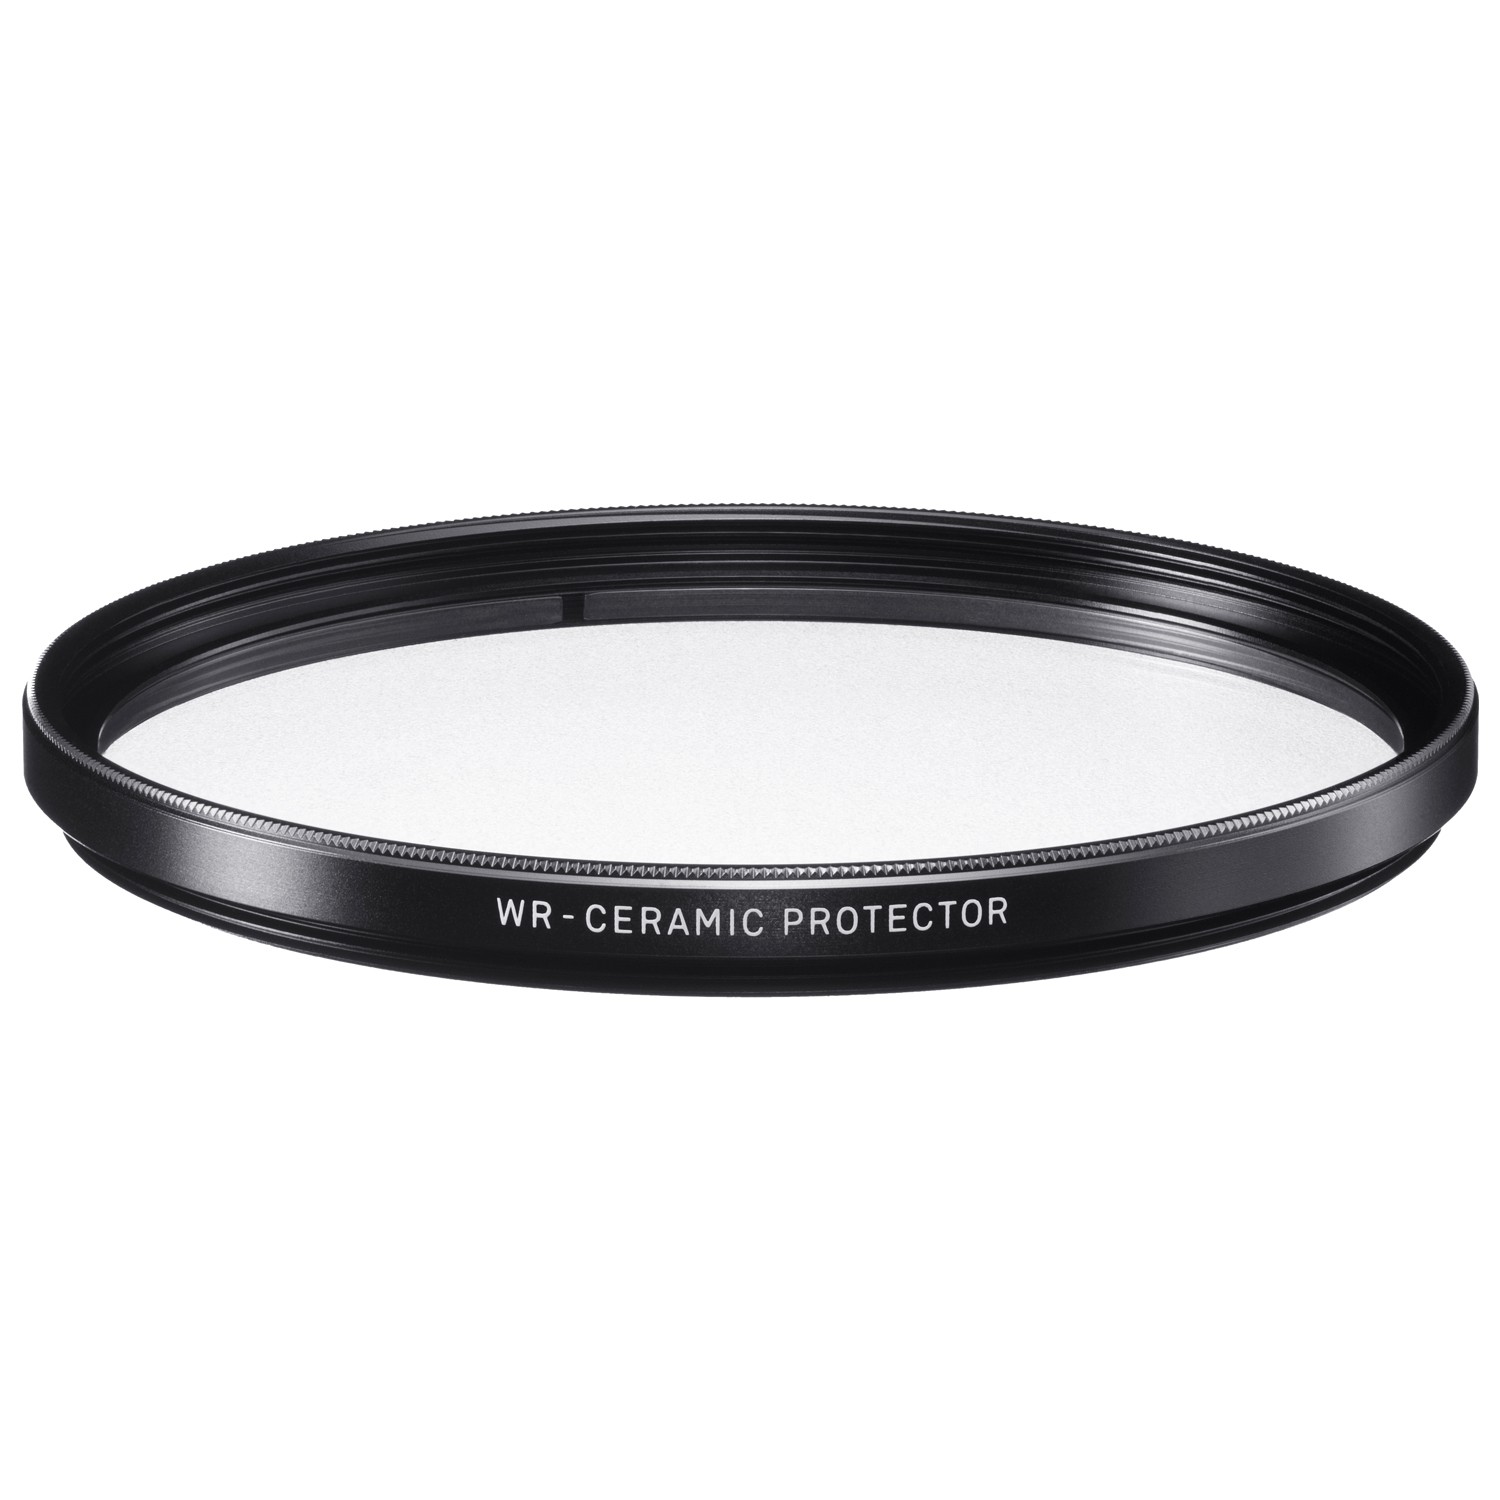 Image of Sigma WR Ceramic Protect Filter 105mm